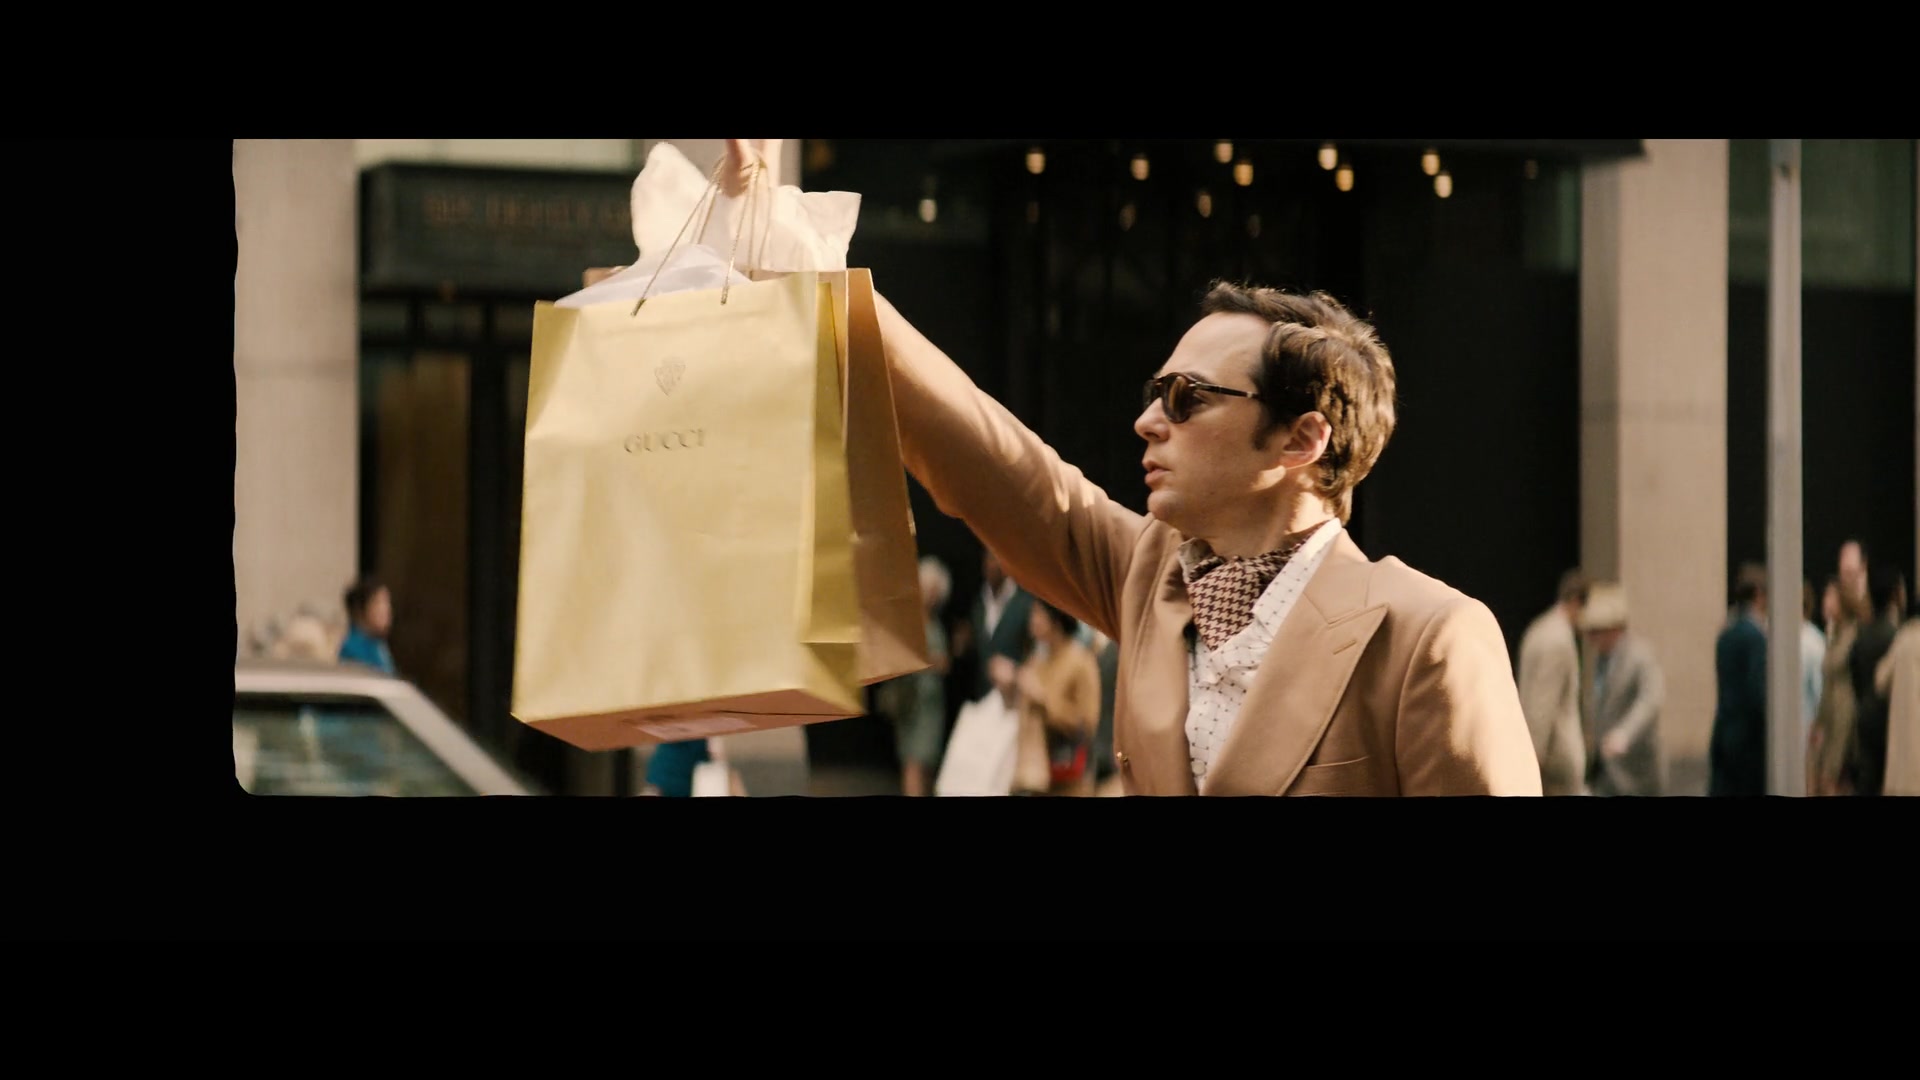 Gucci Logo Paper Bag Held By Jim Parsons As Michael In The Boys In The ...